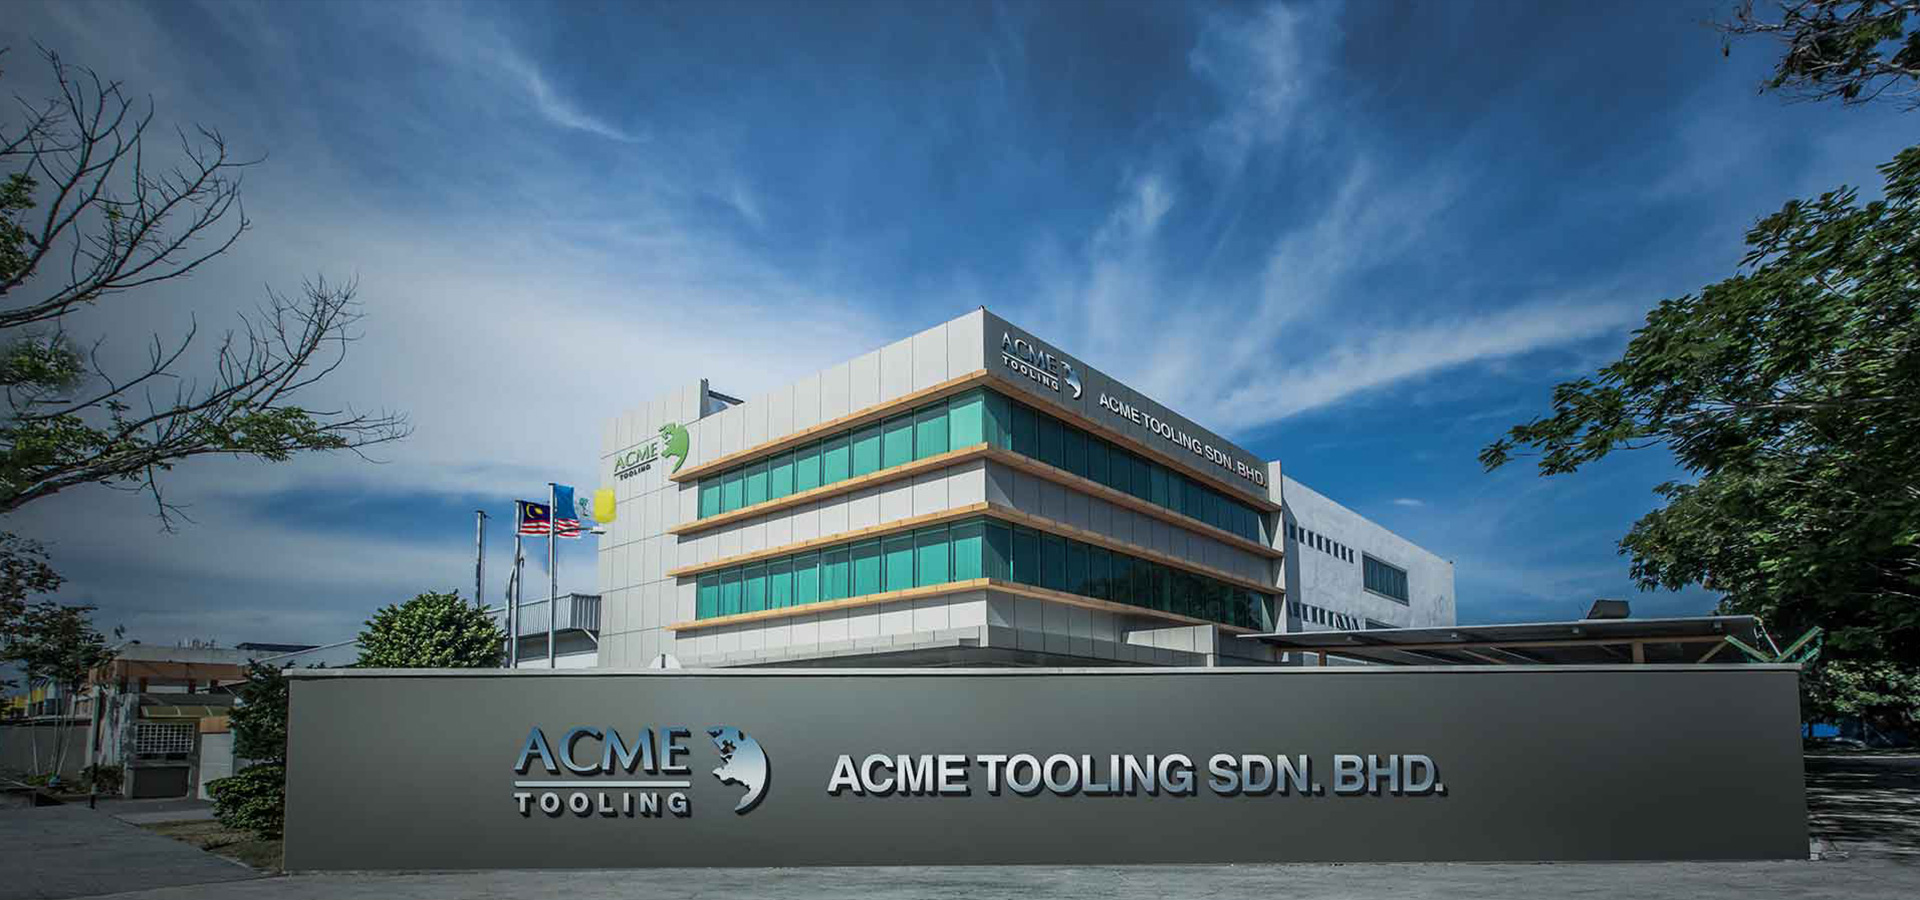 ACME TOOLING â€“ Bringing You the Best Rapid Quality Tooling Design and  Fabrication of Automation Equipment